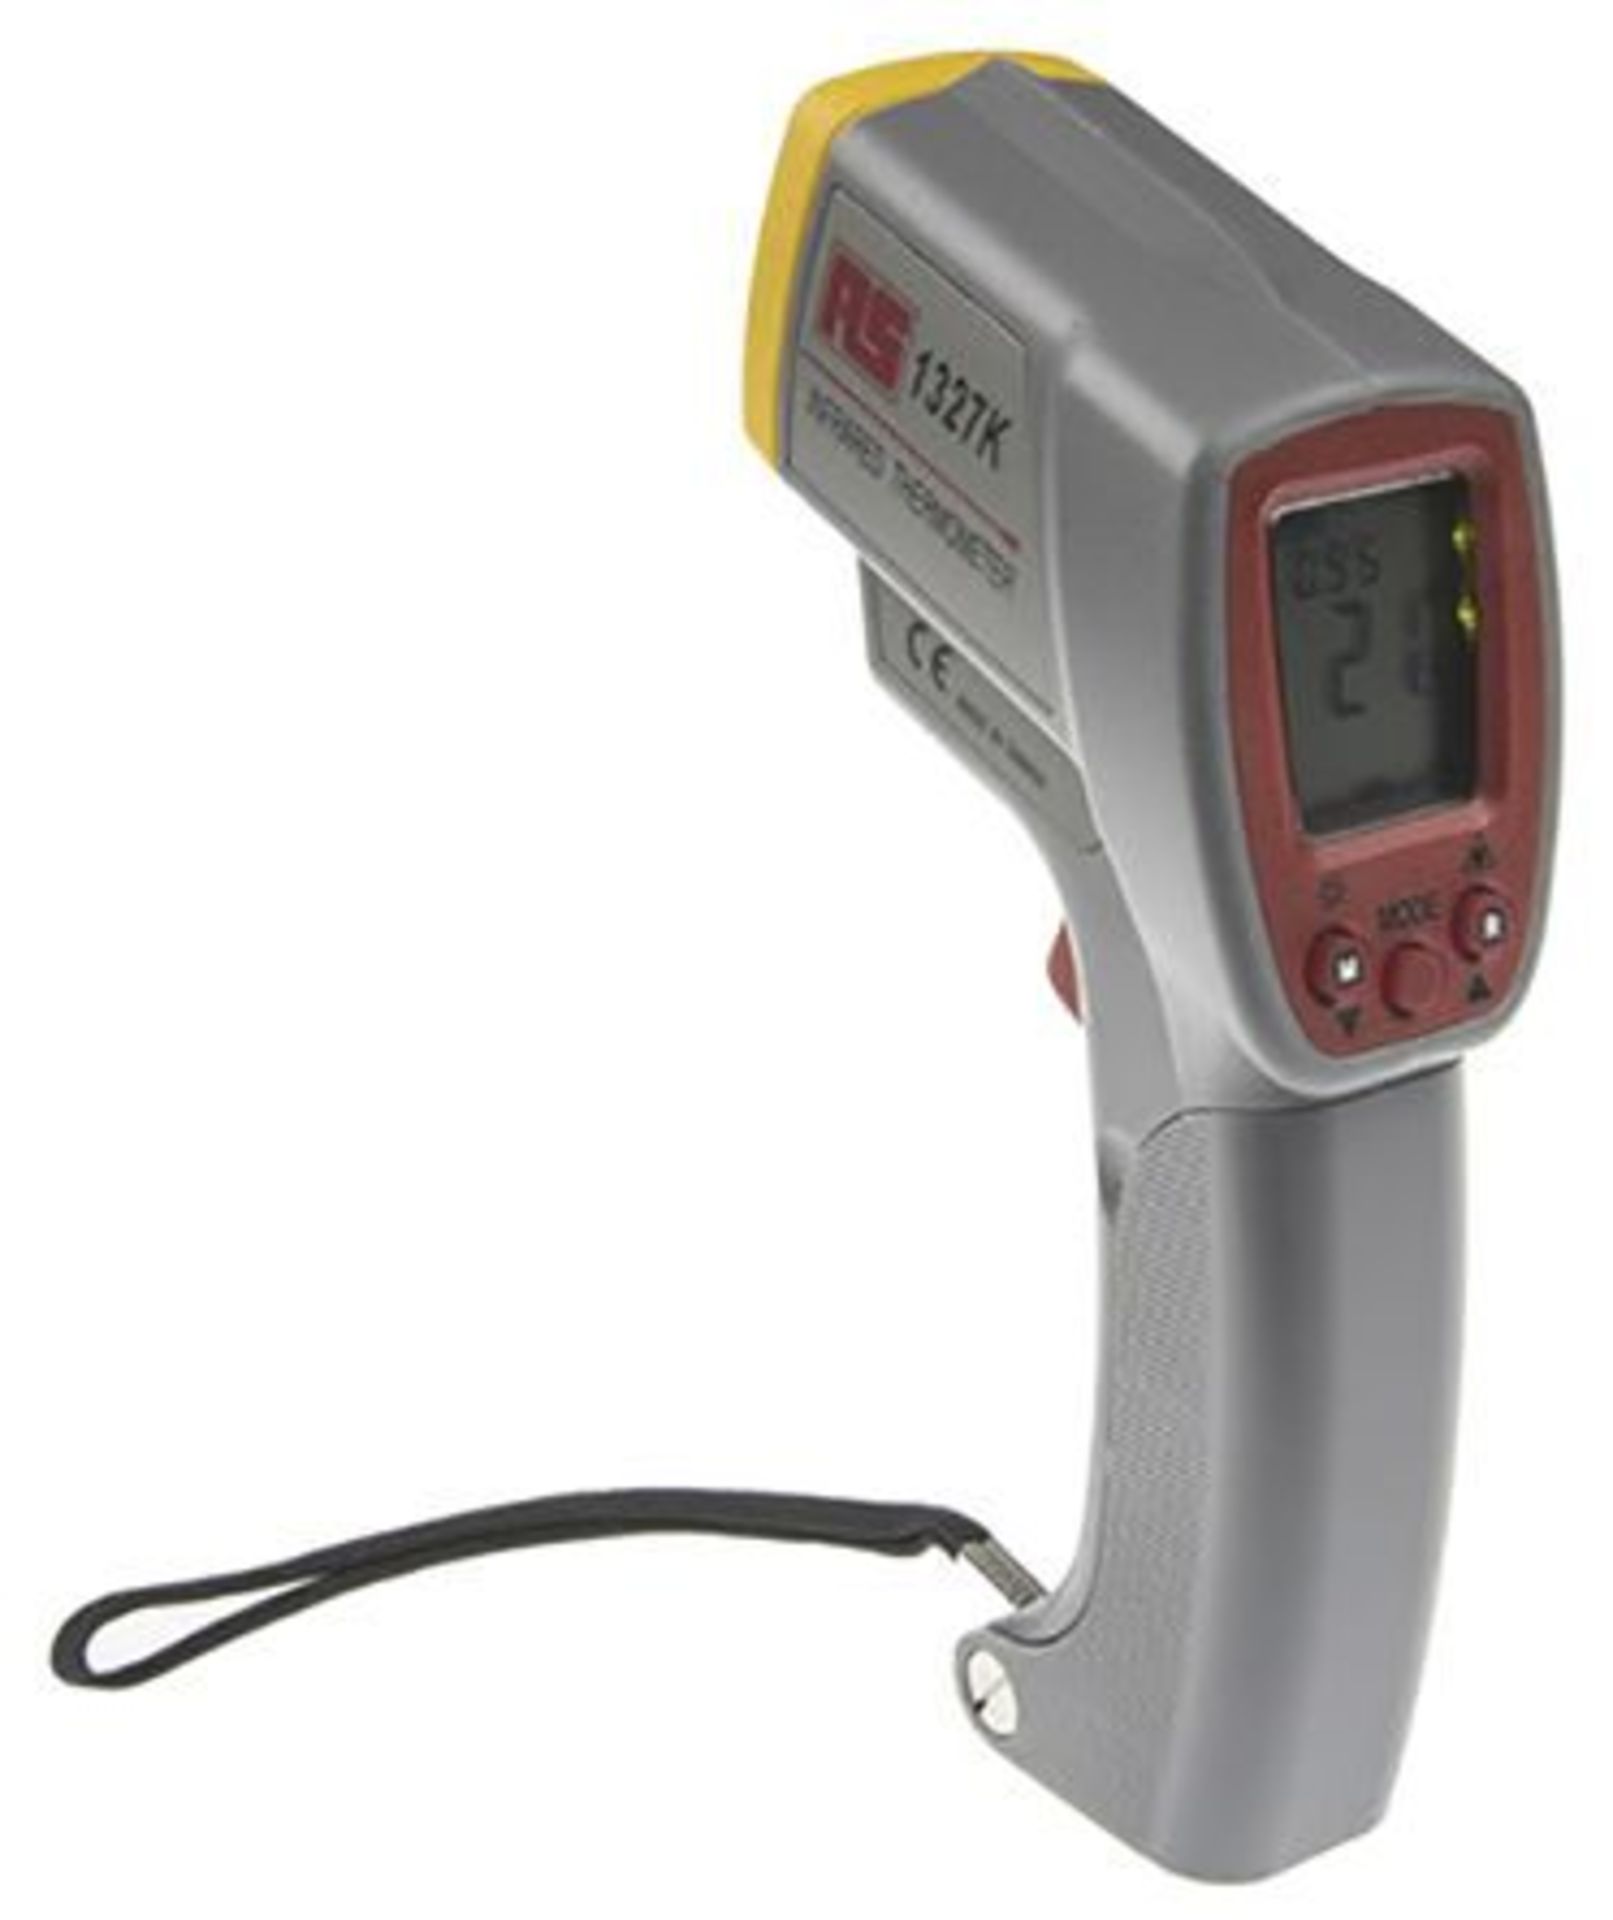 RS-1327K Infrared Thermometer with socket for Type K thermocouple